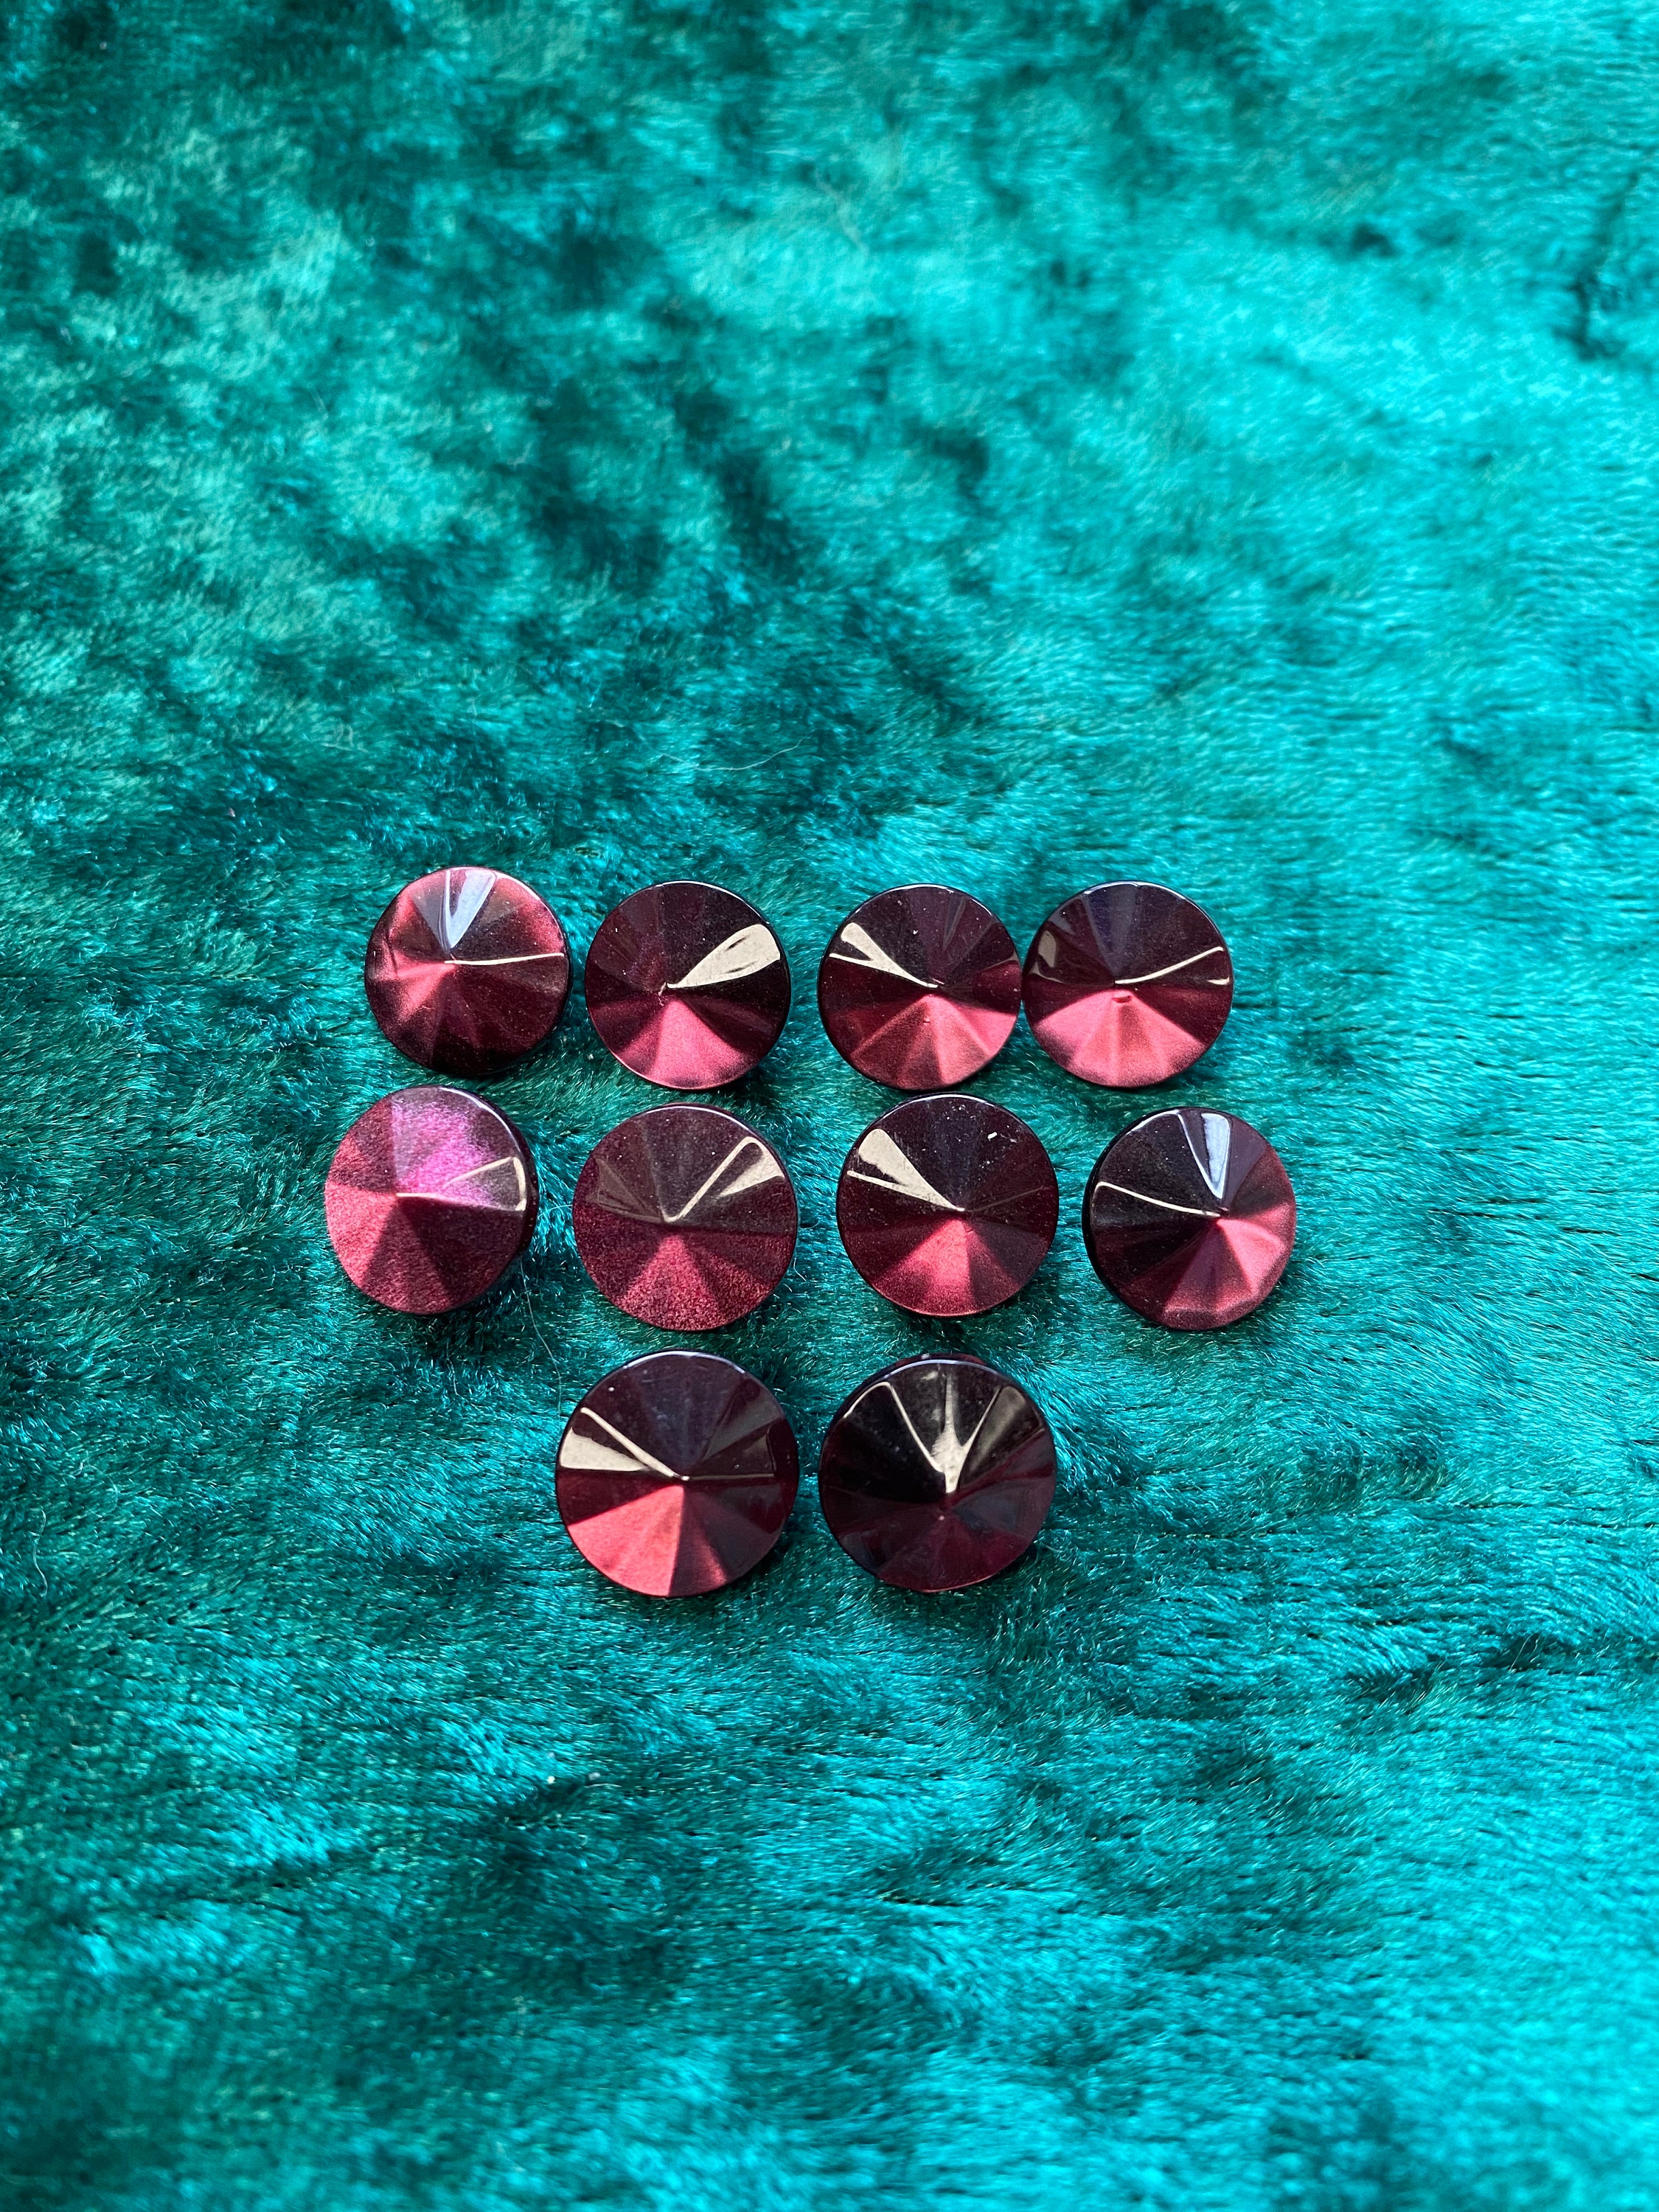 Pearly buttons burgundy faceted design 10mm a set of 10